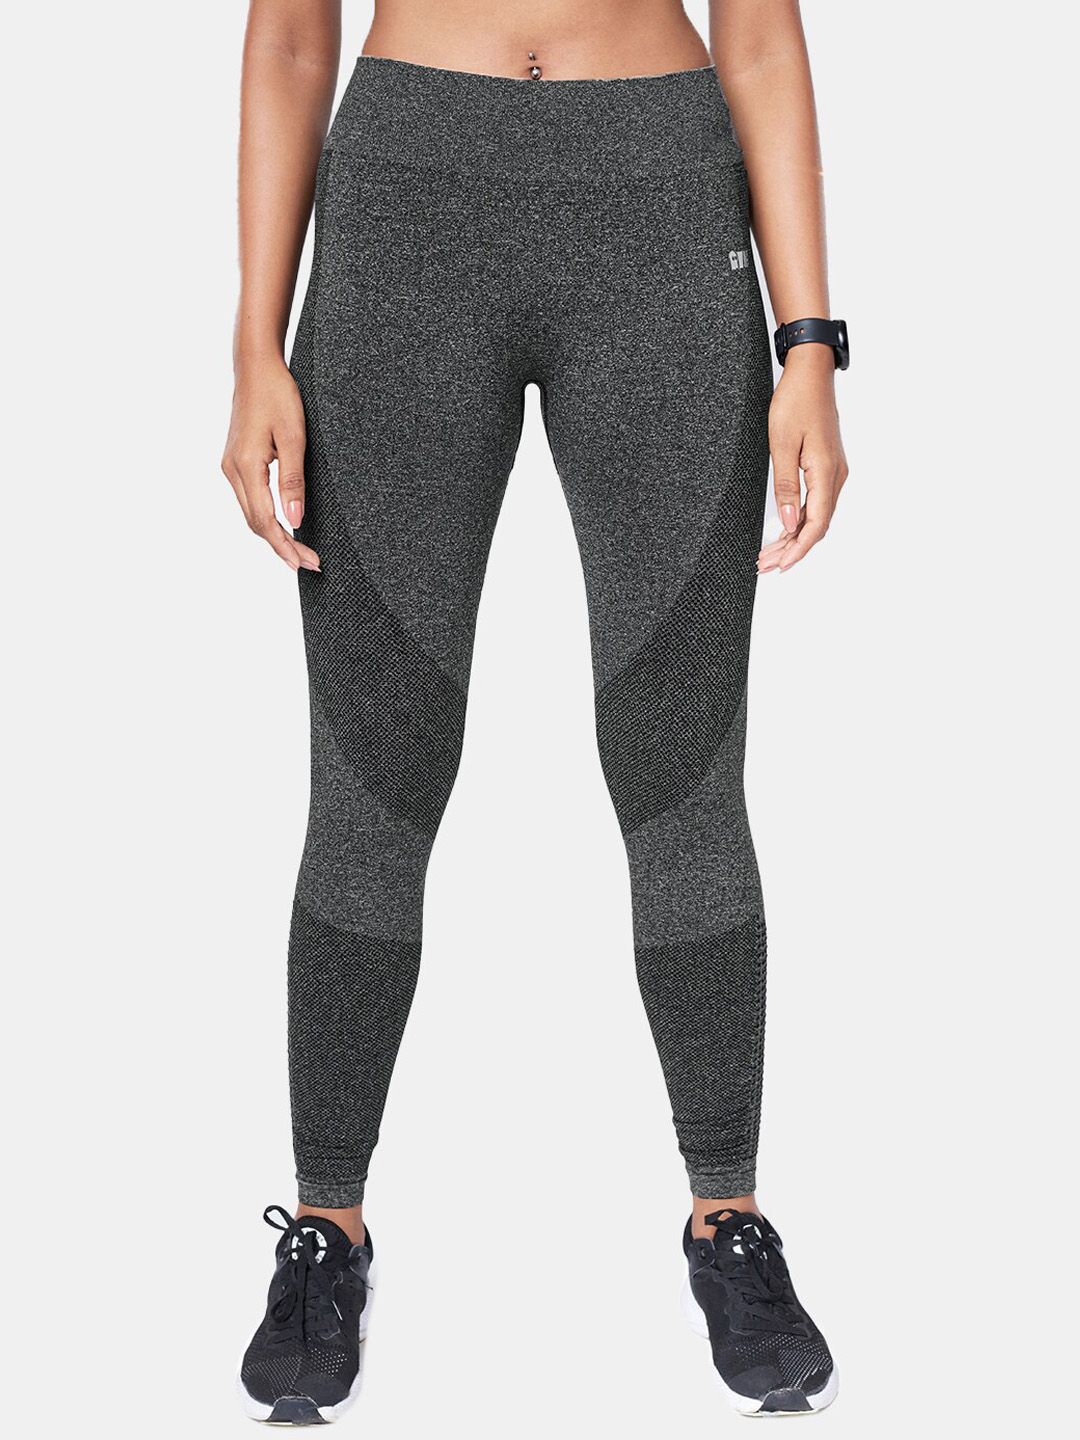 The Souled Store Women Charcoal Solid Training Tights Price in India